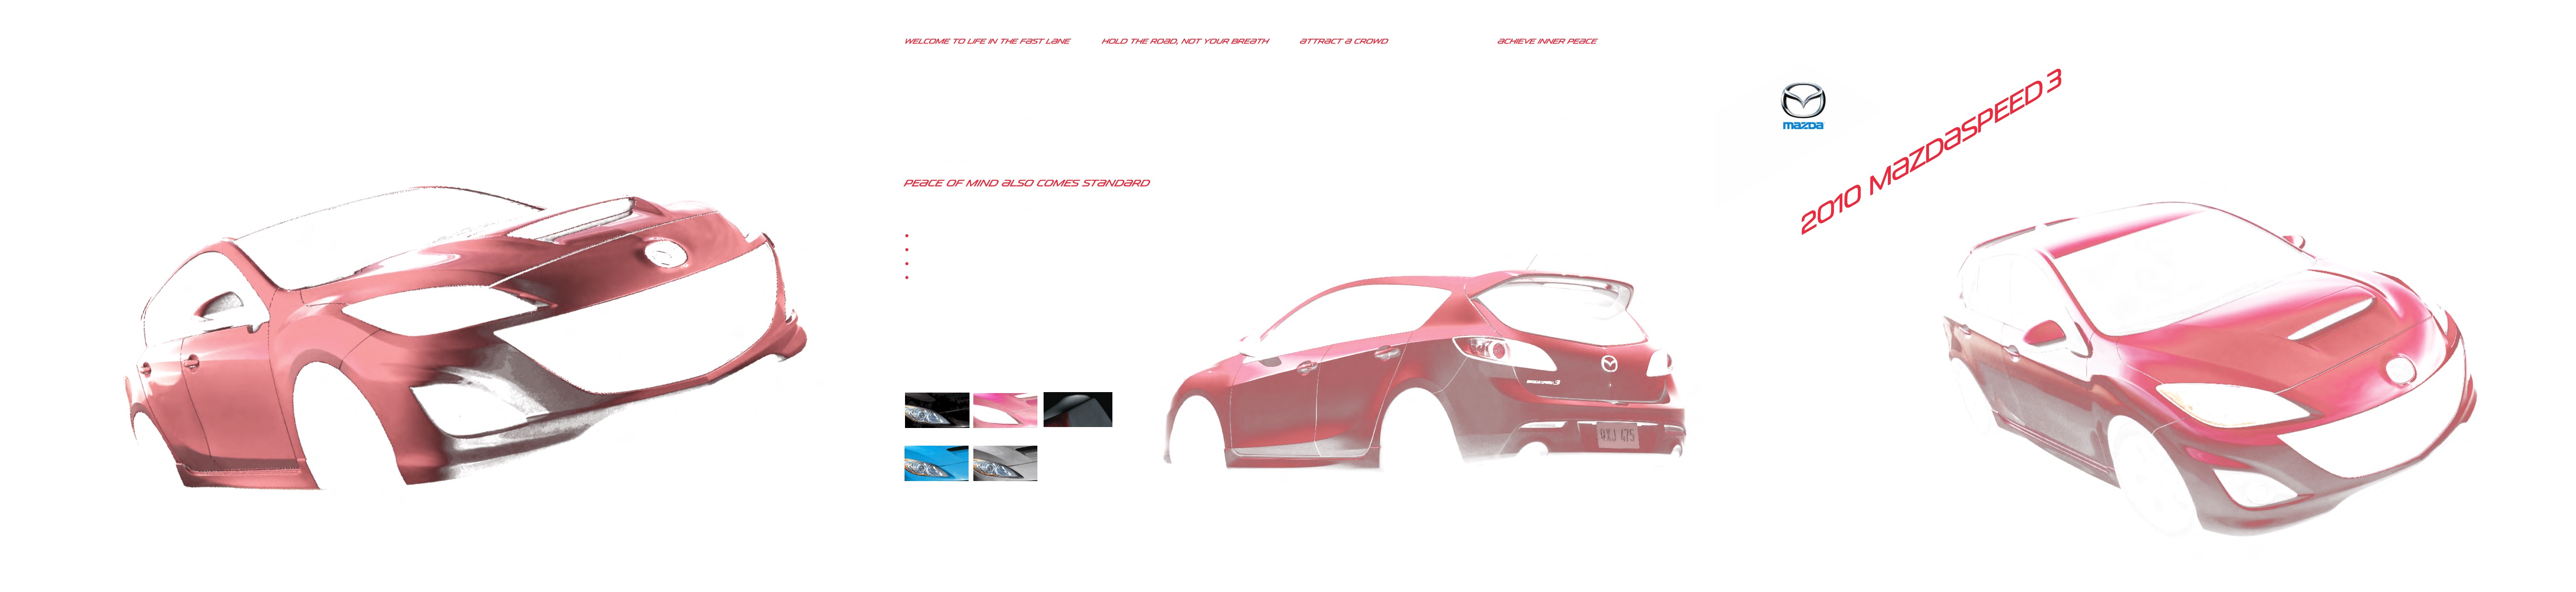 2010 Mazda 3 Speed Brochure Page 1